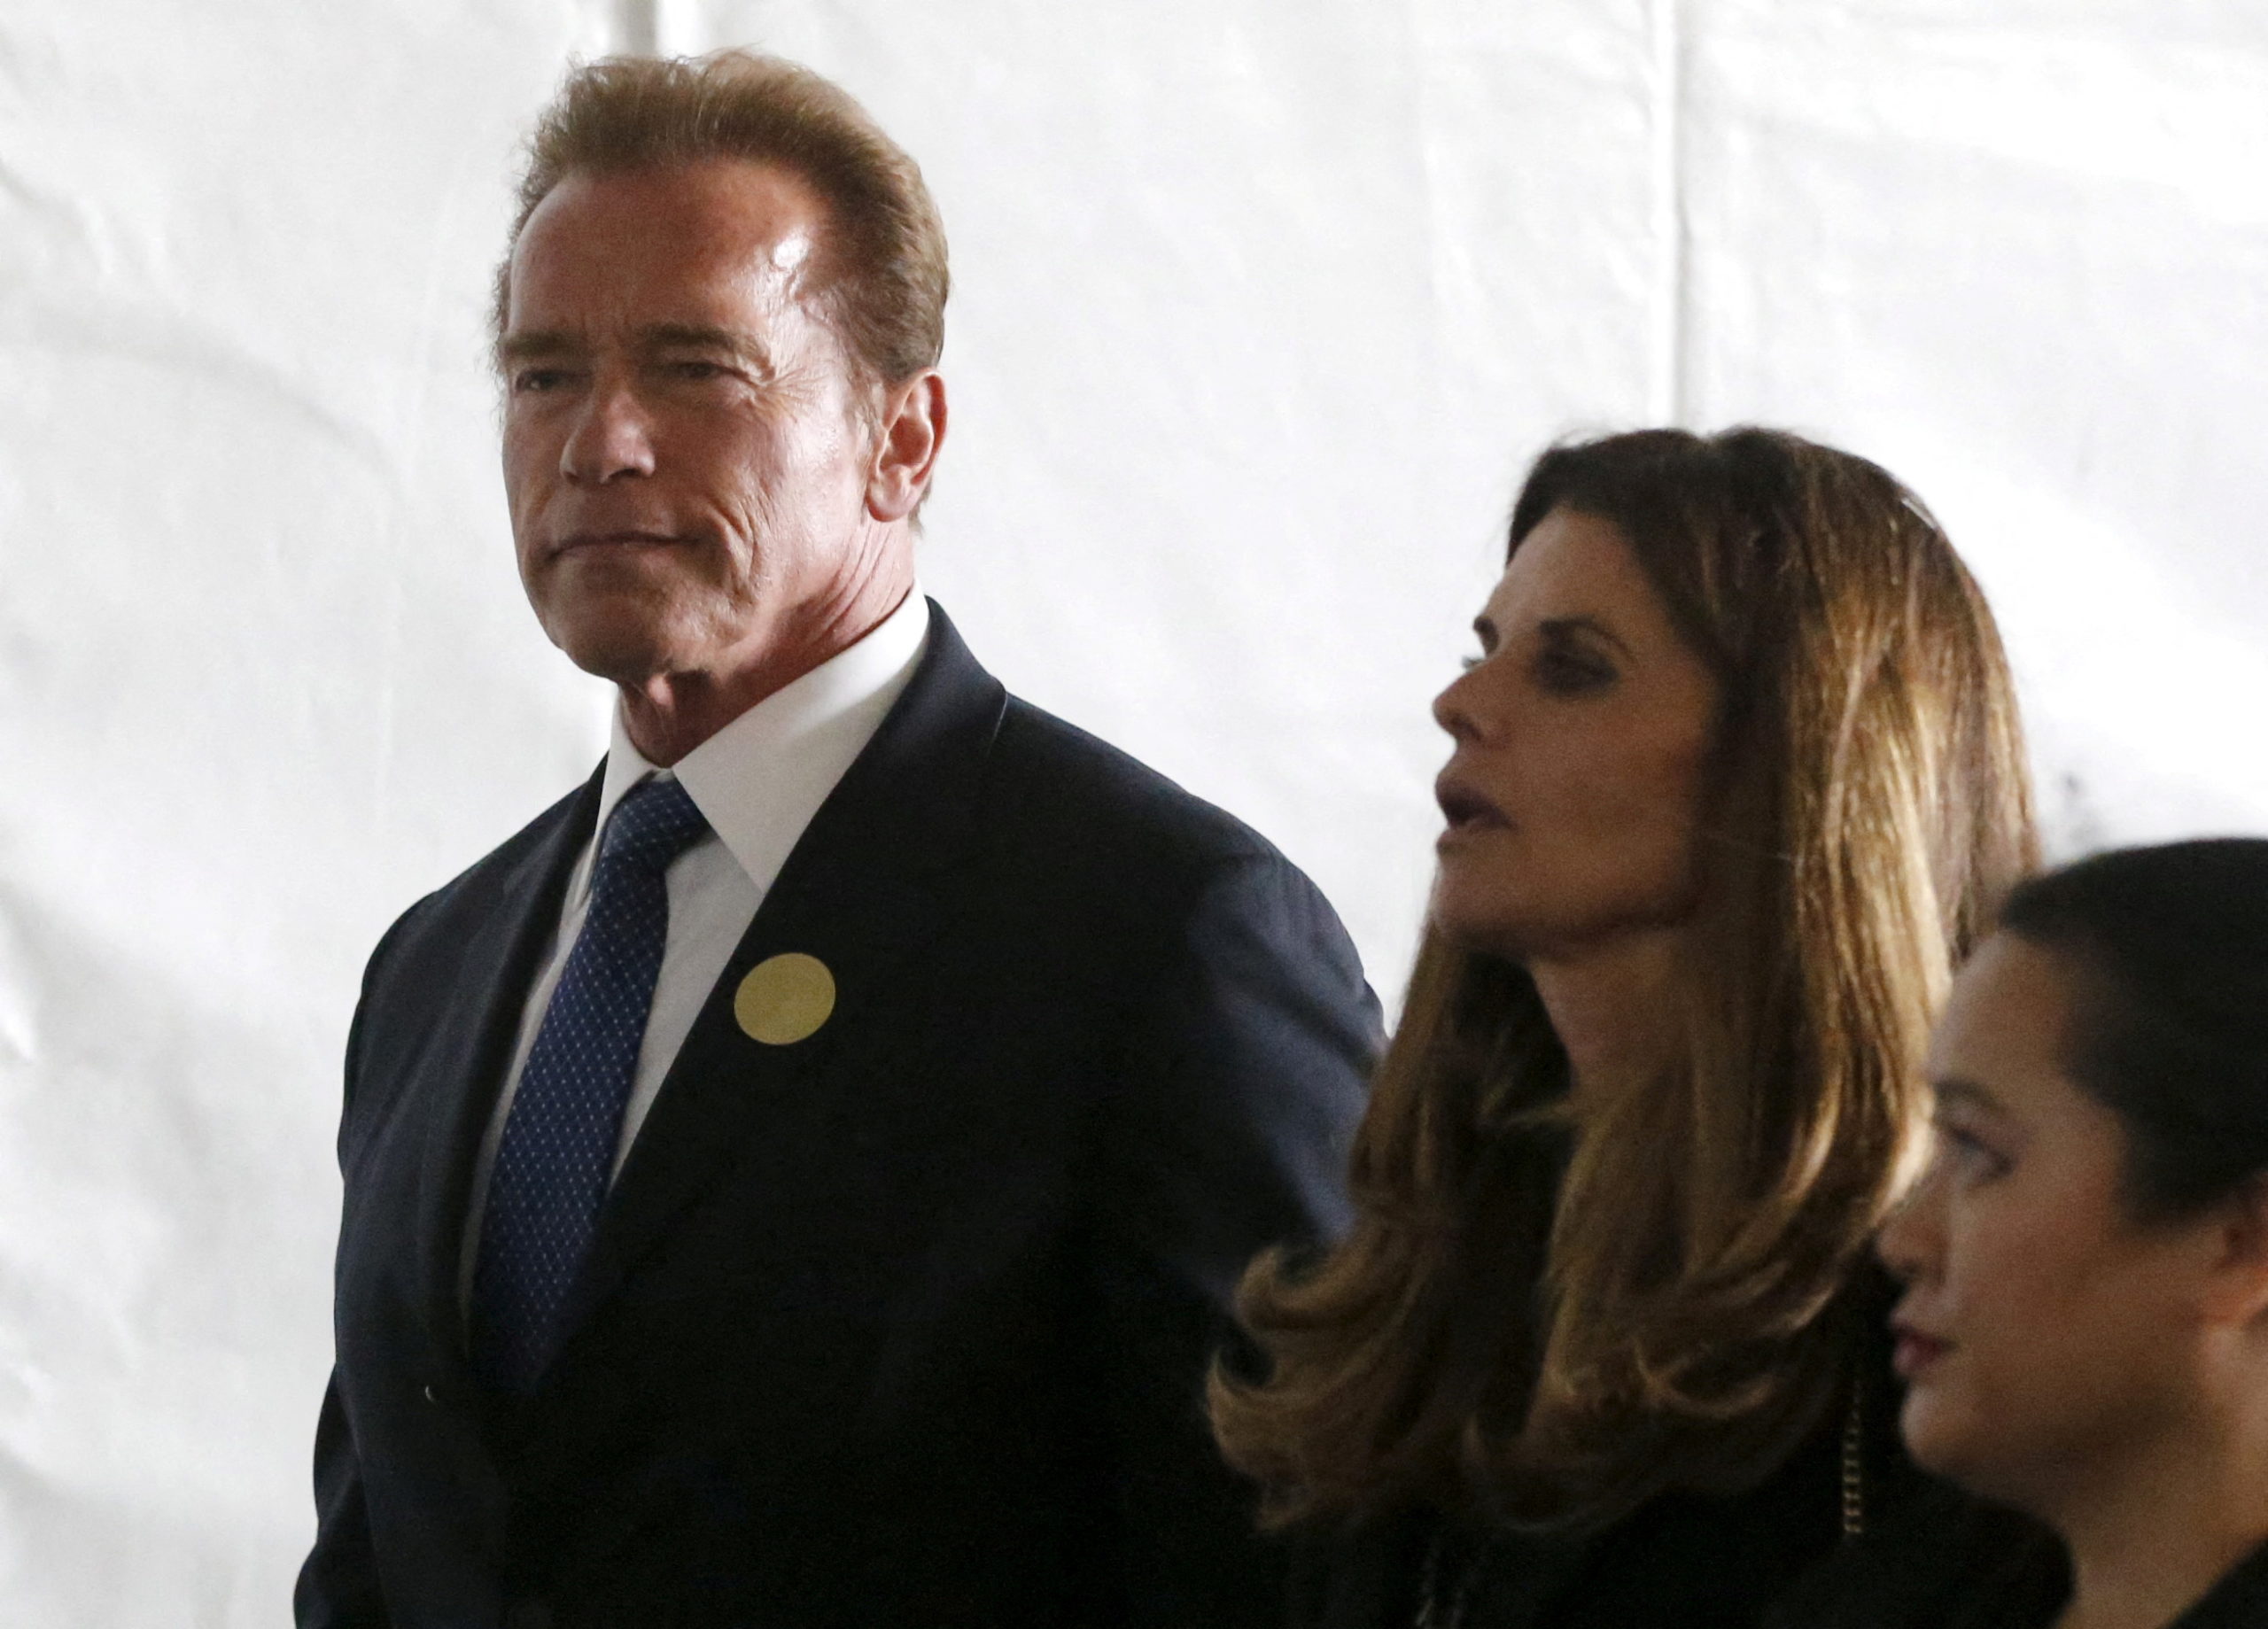 Former California Governor Arnold Schwarzenegger (L) and Maria Shriver walk to the grave site at the funeral of Nancy Reagan at the Ronald Reagan Presidential Library in Simi Valley, California, United States, March 11, 2016. REUTERS/Lucy Nicholson